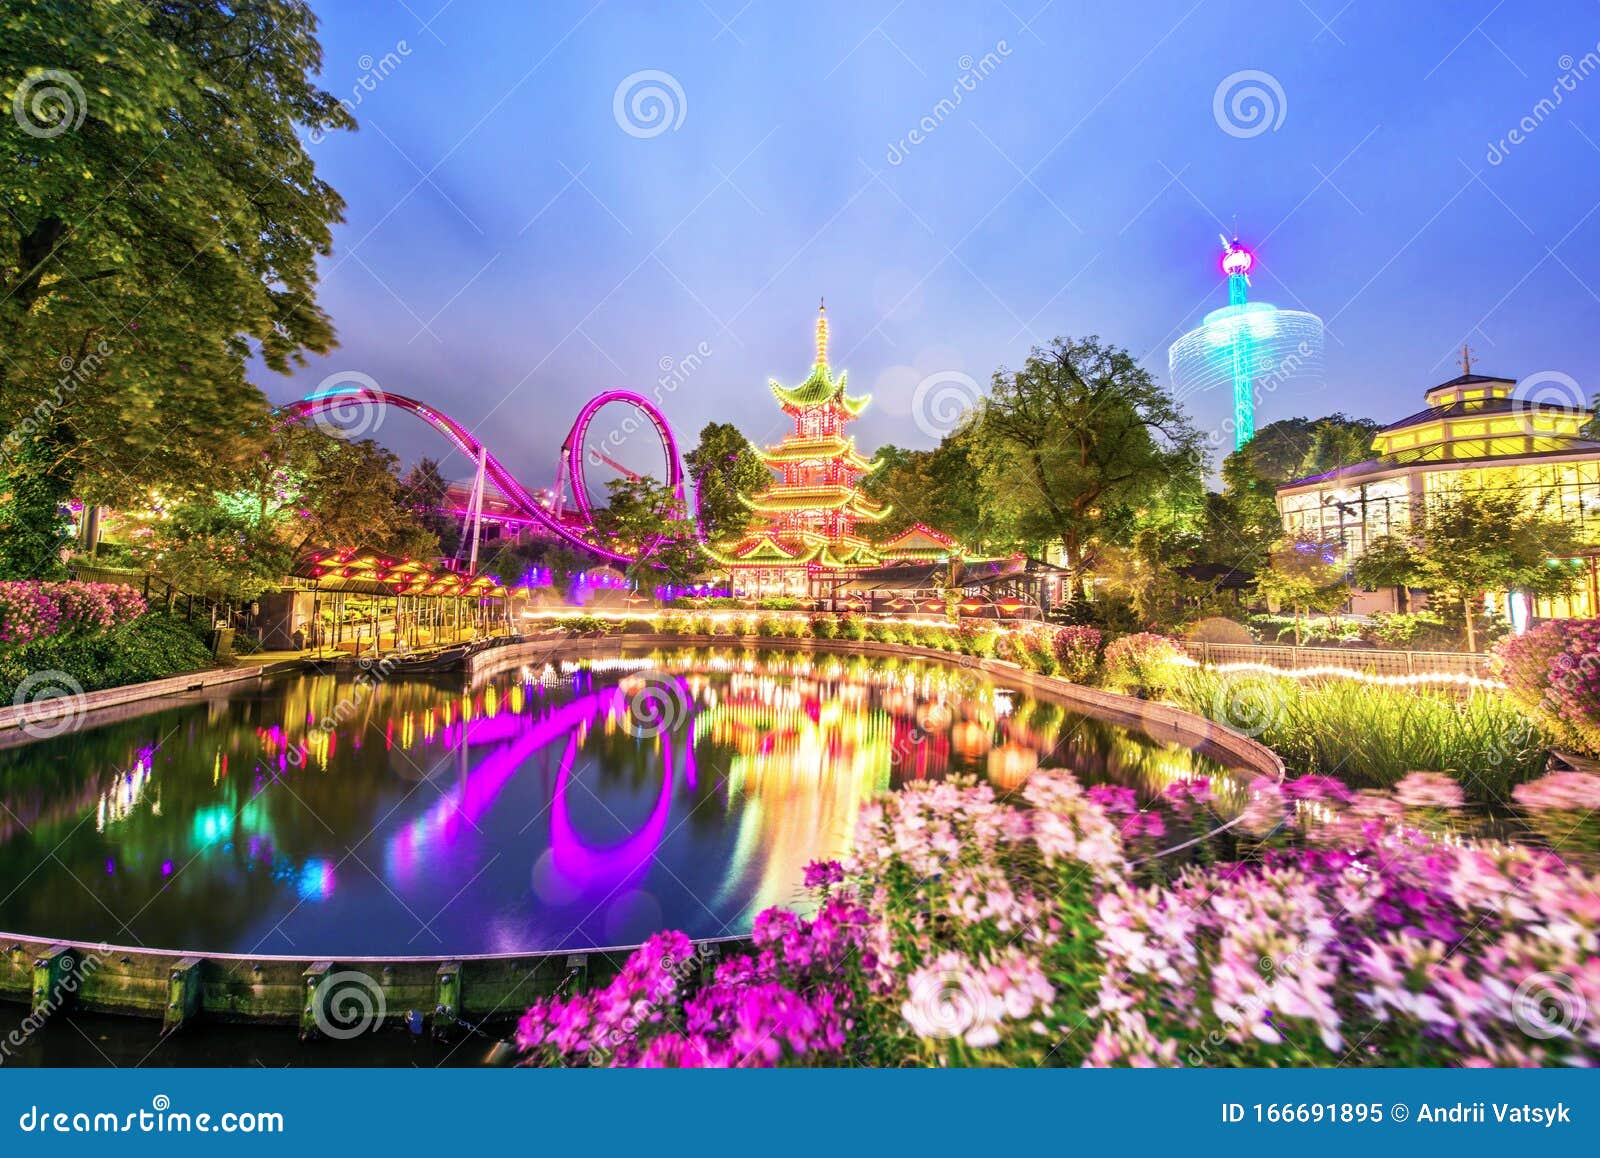 breathtaking magical landscape in tivoli gardens in the evening with lake and flowers. copenhagen, denmark. exotic amazing places